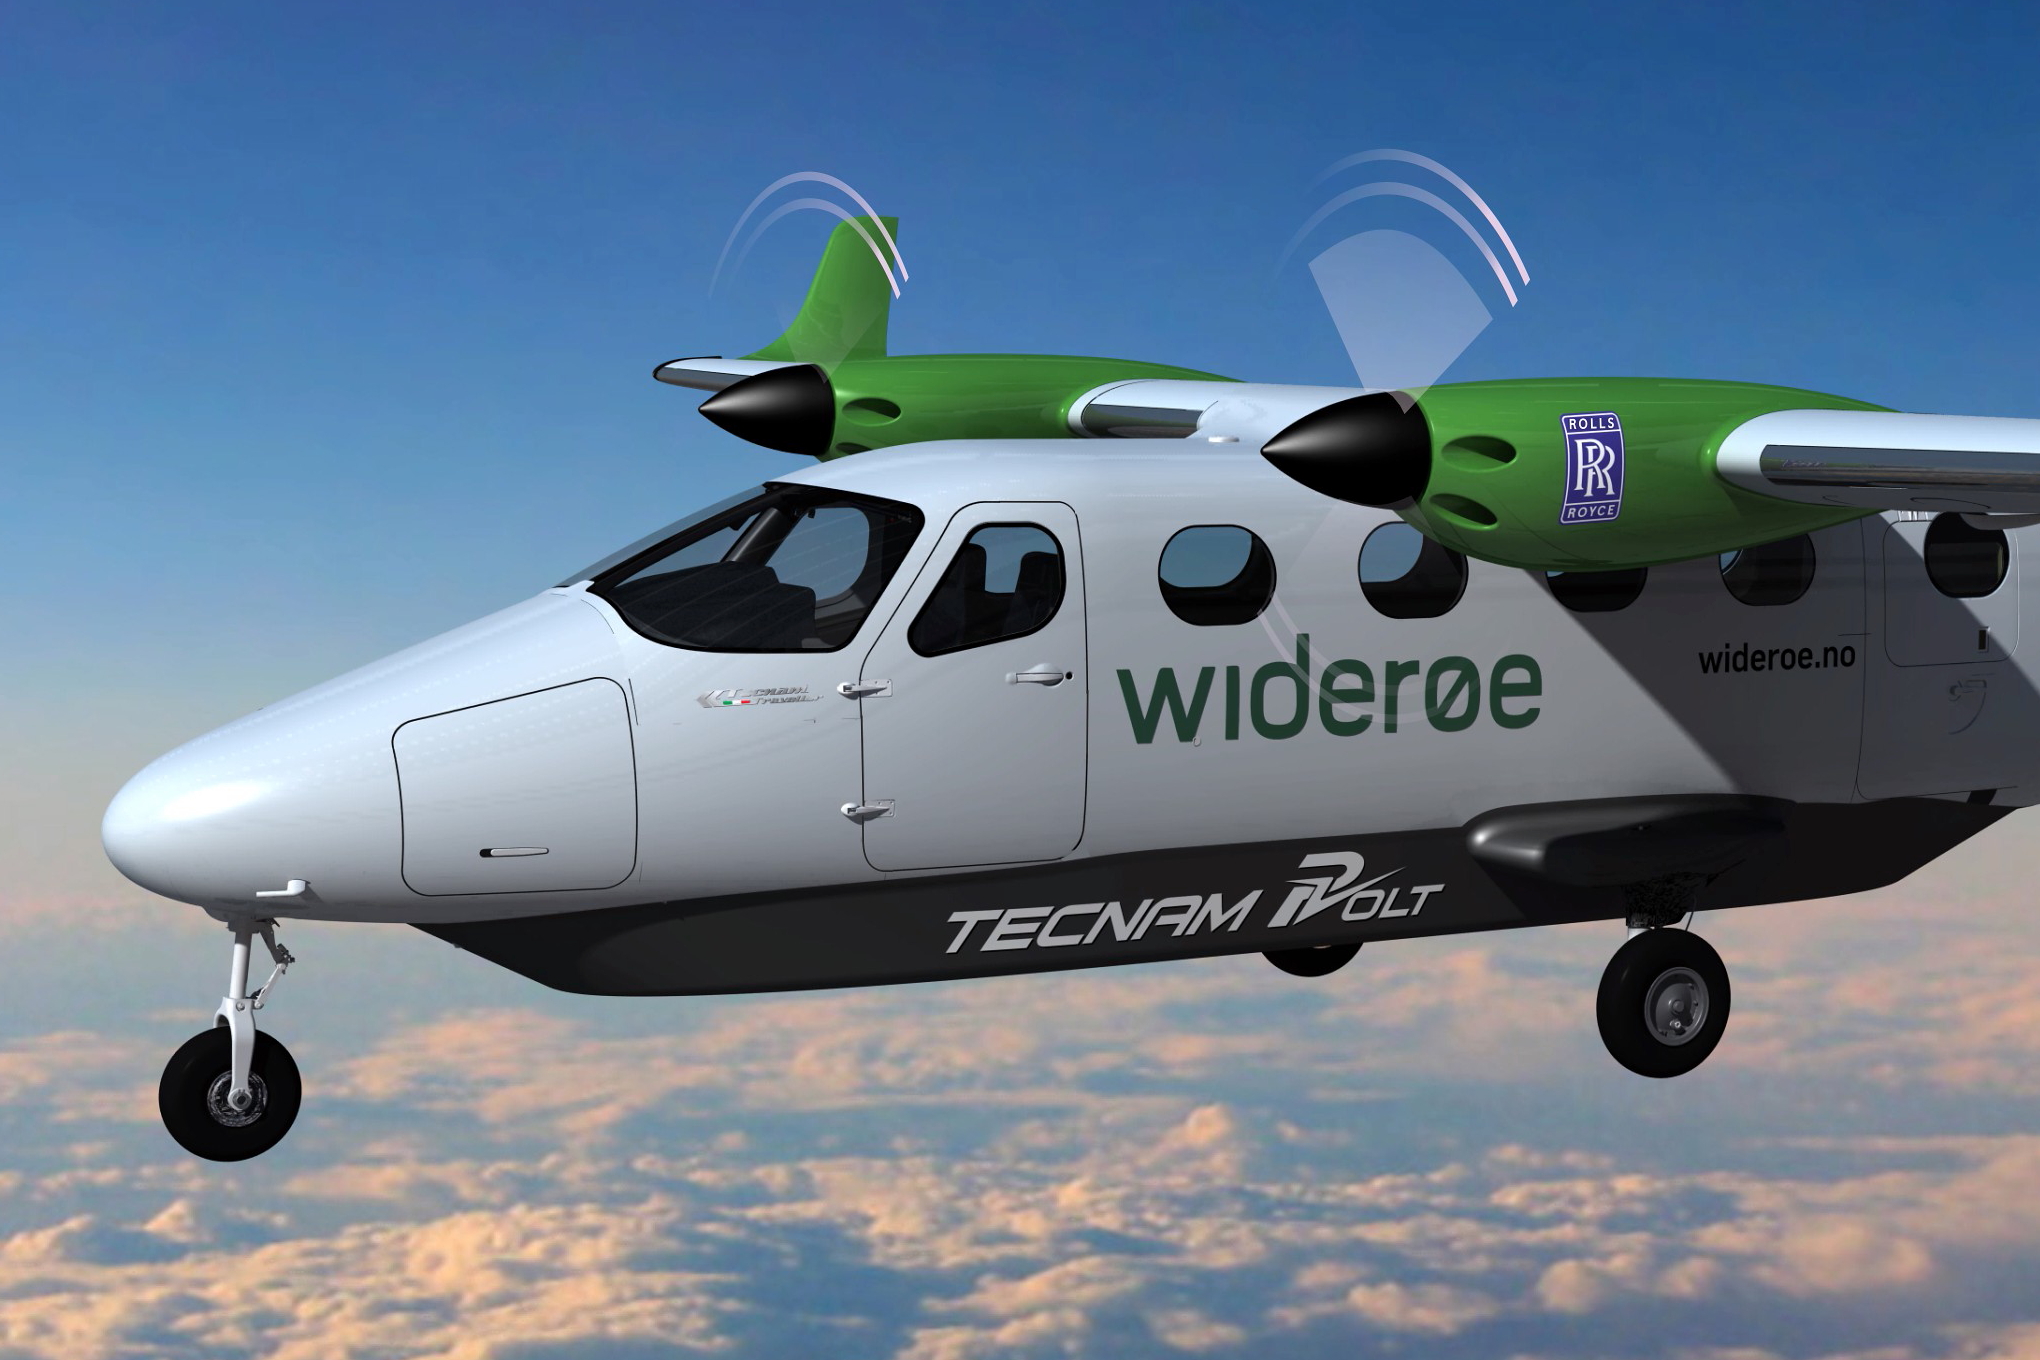 Rolls-Royce and airframer Tecnam are joining forces with Widerøe, the largest regional airline in Scandinavia, to deliver an all-electric passenger aircraft for the commuter market, ready for revenue service in 2026. Click to enlarge.